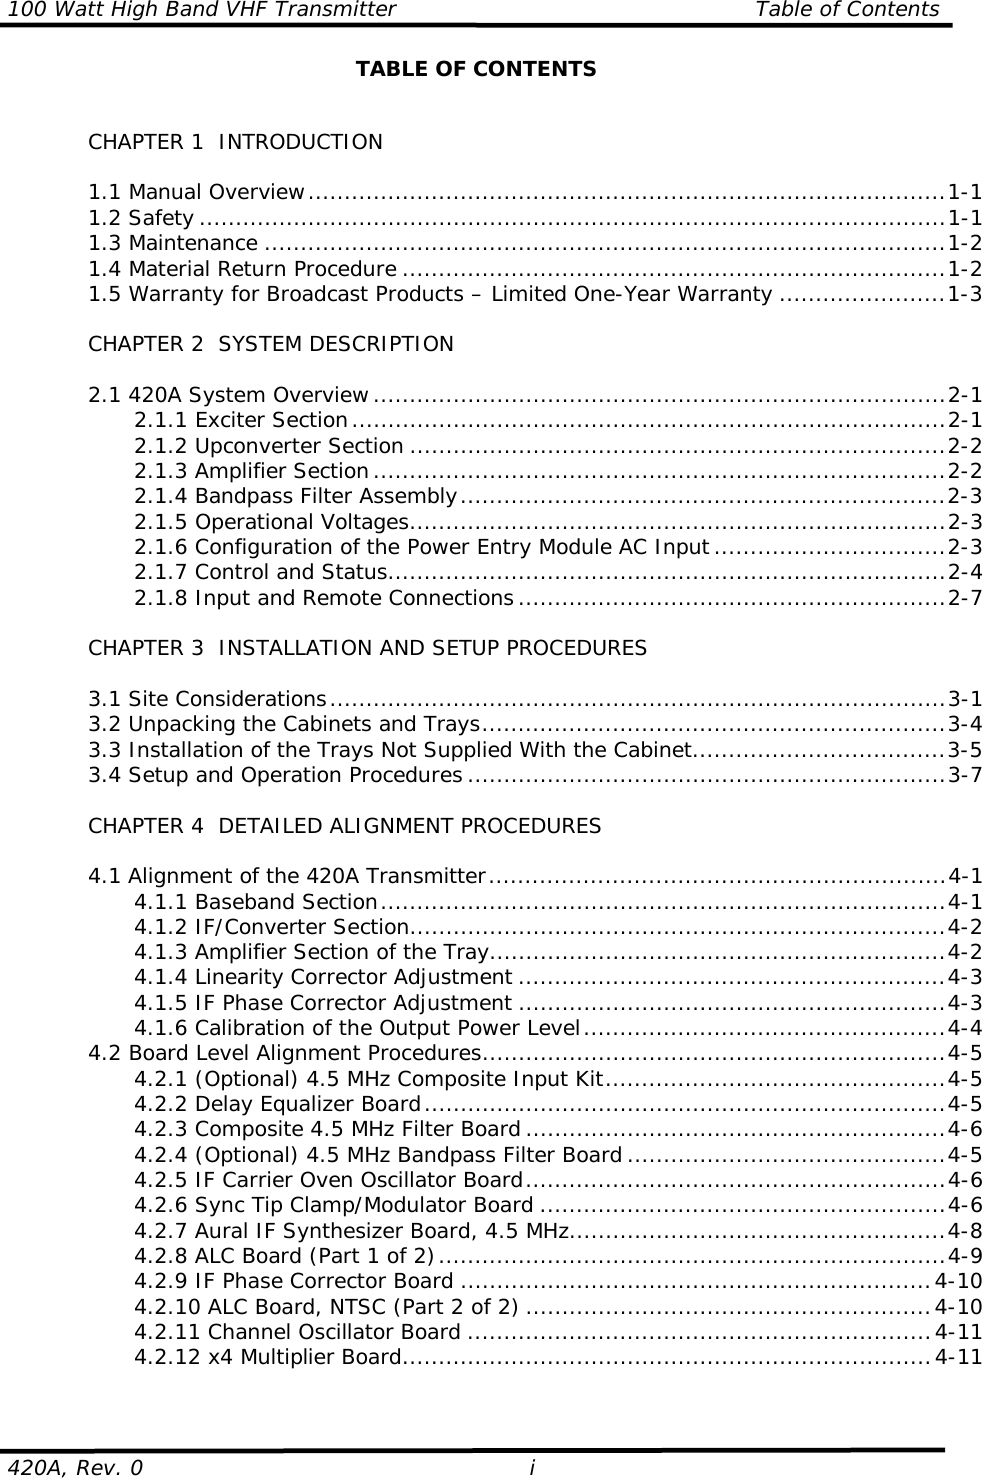 100 Watt High Band VHF Transmitter                                                 Table of Contents420A, Rev. 0 iTABLE OF CONTENTSCHAPTER 1  INTRODUCTION1.1 Manual Overview........................................................................................1-11.2 Safety .......................................................................................................1-11.3 Maintenance ..............................................................................................1-21.4 Material Return Procedure ...........................................................................1-21.5 Warranty for Broadcast Products – Limited One-Year Warranty .......................1-3CHAPTER 2  SYSTEM DESCRIPTION2.1 420A System Overview...............................................................................2-12.1.1 Exciter Section..................................................................................2-12.1.2 Upconverter Section ..........................................................................2-22.1.3 Amplifier Section...............................................................................2-22.1.4 Bandpass Filter Assembly...................................................................2-32.1.5 Operational Voltages..........................................................................2-32.1.6 Configuration of the Power Entry Module AC Input ................................2-32.1.7 Control and Status.............................................................................2-42.1.8 Input and Remote Connections ...........................................................2-7CHAPTER 3  INSTALLATION AND SETUP PROCEDURES3.1 Site Considerations.....................................................................................3-13.2 Unpacking the Cabinets and Trays................................................................3-43.3 Installation of the Trays Not Supplied With the Cabinet...................................3-53.4 Setup and Operation Procedures ..................................................................3-7CHAPTER 4  DETAILED ALIGNMENT PROCEDURES4.1 Alignment of the 420A Transmitter...............................................................4-14.1.1 Baseband Section..............................................................................4-14.1.2 IF/Converter Section..........................................................................4-24.1.3 Amplifier Section of the Tray...............................................................4-24.1.4 Linearity Corrector Adjustment ...........................................................4-34.1.5 IF Phase Corrector Adjustment ...........................................................4-34.1.6 Calibration of the Output Power Level..................................................4-44.2 Board Level Alignment Procedures................................................................4-54.2.1 (Optional) 4.5 MHz Composite Input Kit...............................................4-54.2.2 Delay Equalizer Board........................................................................4-54.2.3 Composite 4.5 MHz Filter Board ..........................................................4-64.2.4 (Optional) 4.5 MHz Bandpass Filter Board ............................................4-54.2.5 IF Carrier Oven Oscillator Board..........................................................4-64.2.6 Sync Tip Clamp/Modulator Board ........................................................4-64.2.7 Aural IF Synthesizer Board, 4.5 MHz....................................................4-84.2.8 ALC Board (Part 1 of 2)......................................................................4-94.2.9 IF Phase Corrector Board .................................................................4-104.2.10 ALC Board, NTSC (Part 2 of 2) ........................................................4-104.2.11 Channel Oscillator Board ................................................................4-114.2.12 x4 Multiplier Board.........................................................................4-11